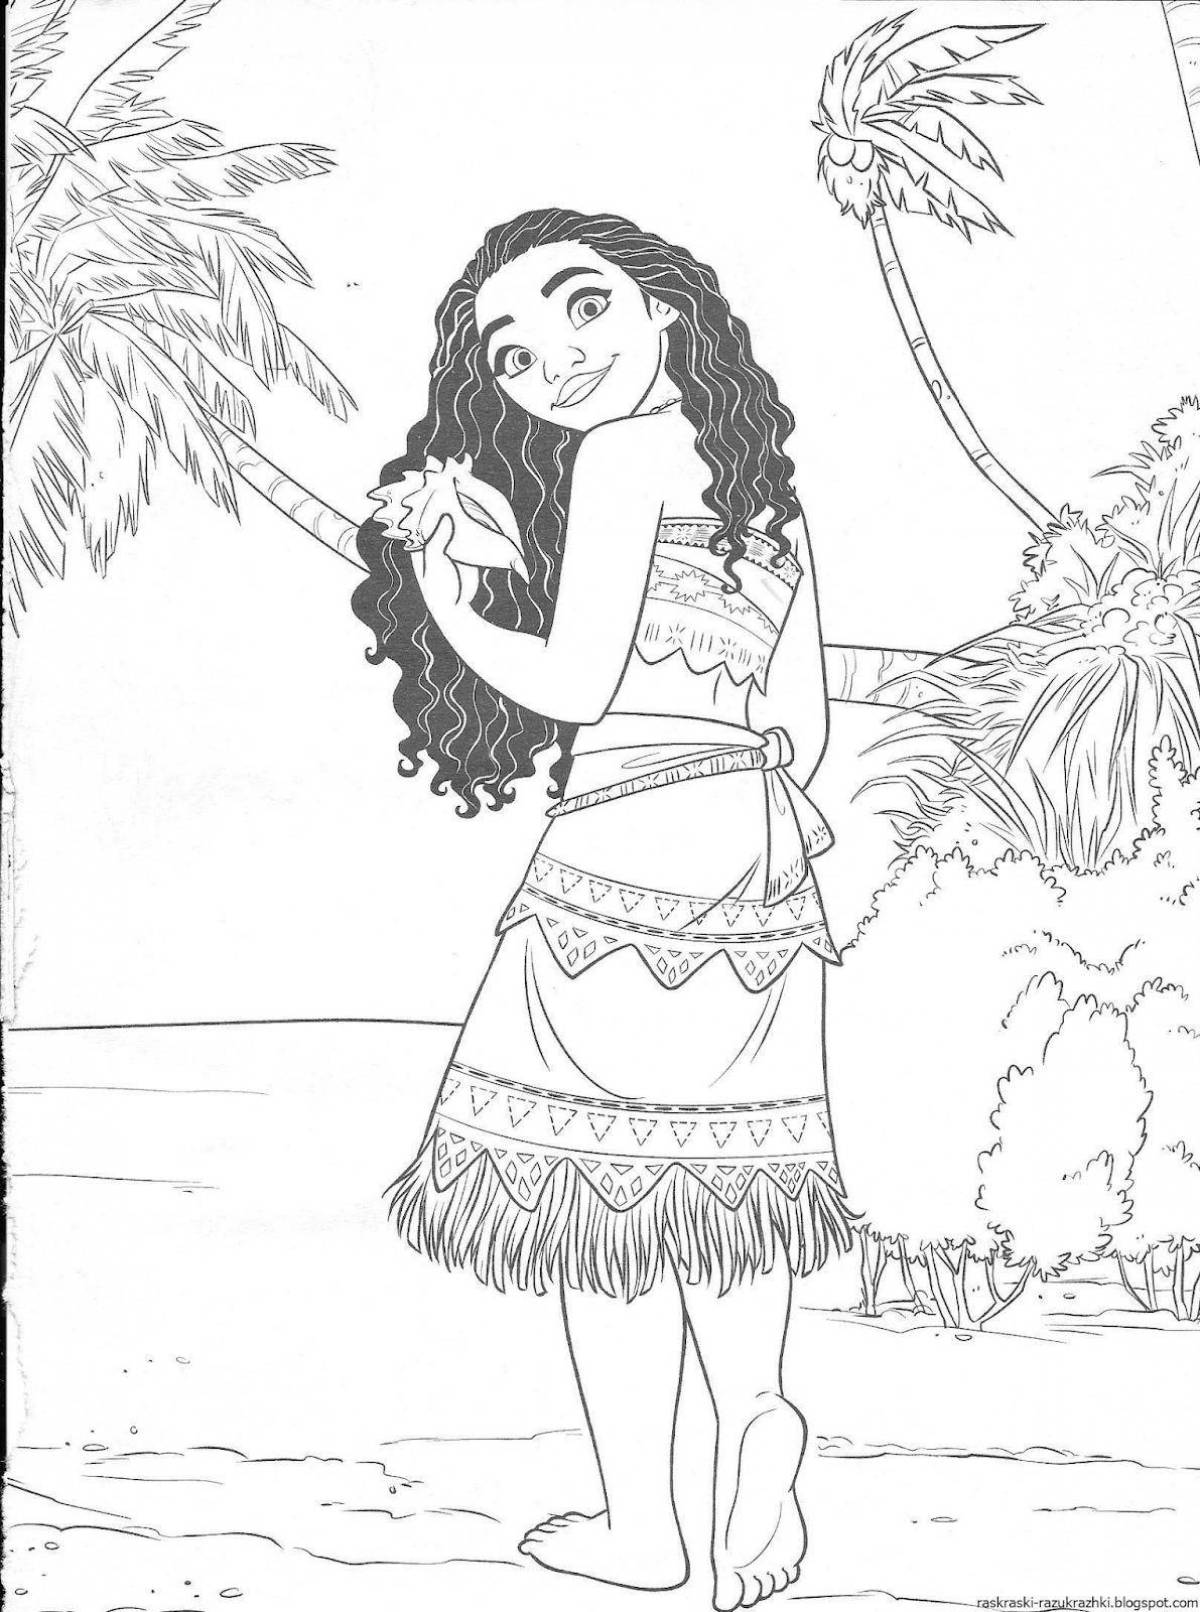 Crazy Muana coloring page